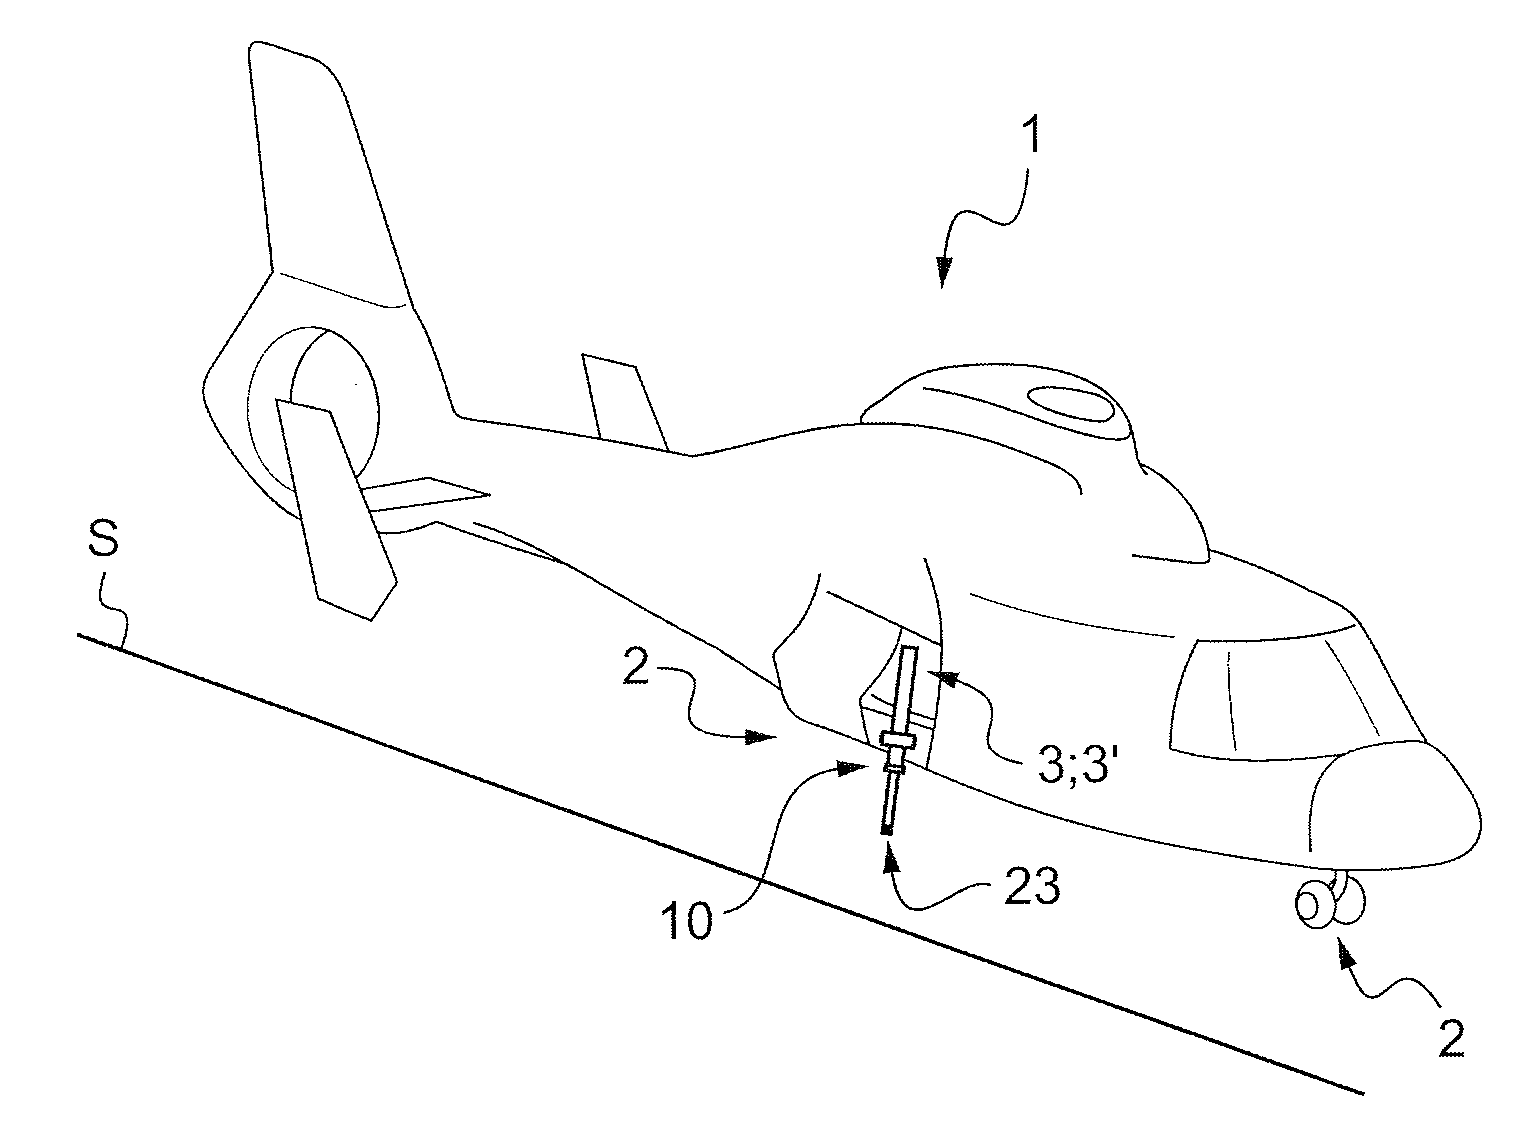 Rotary wing aircraft provided with an emergency undercarriage